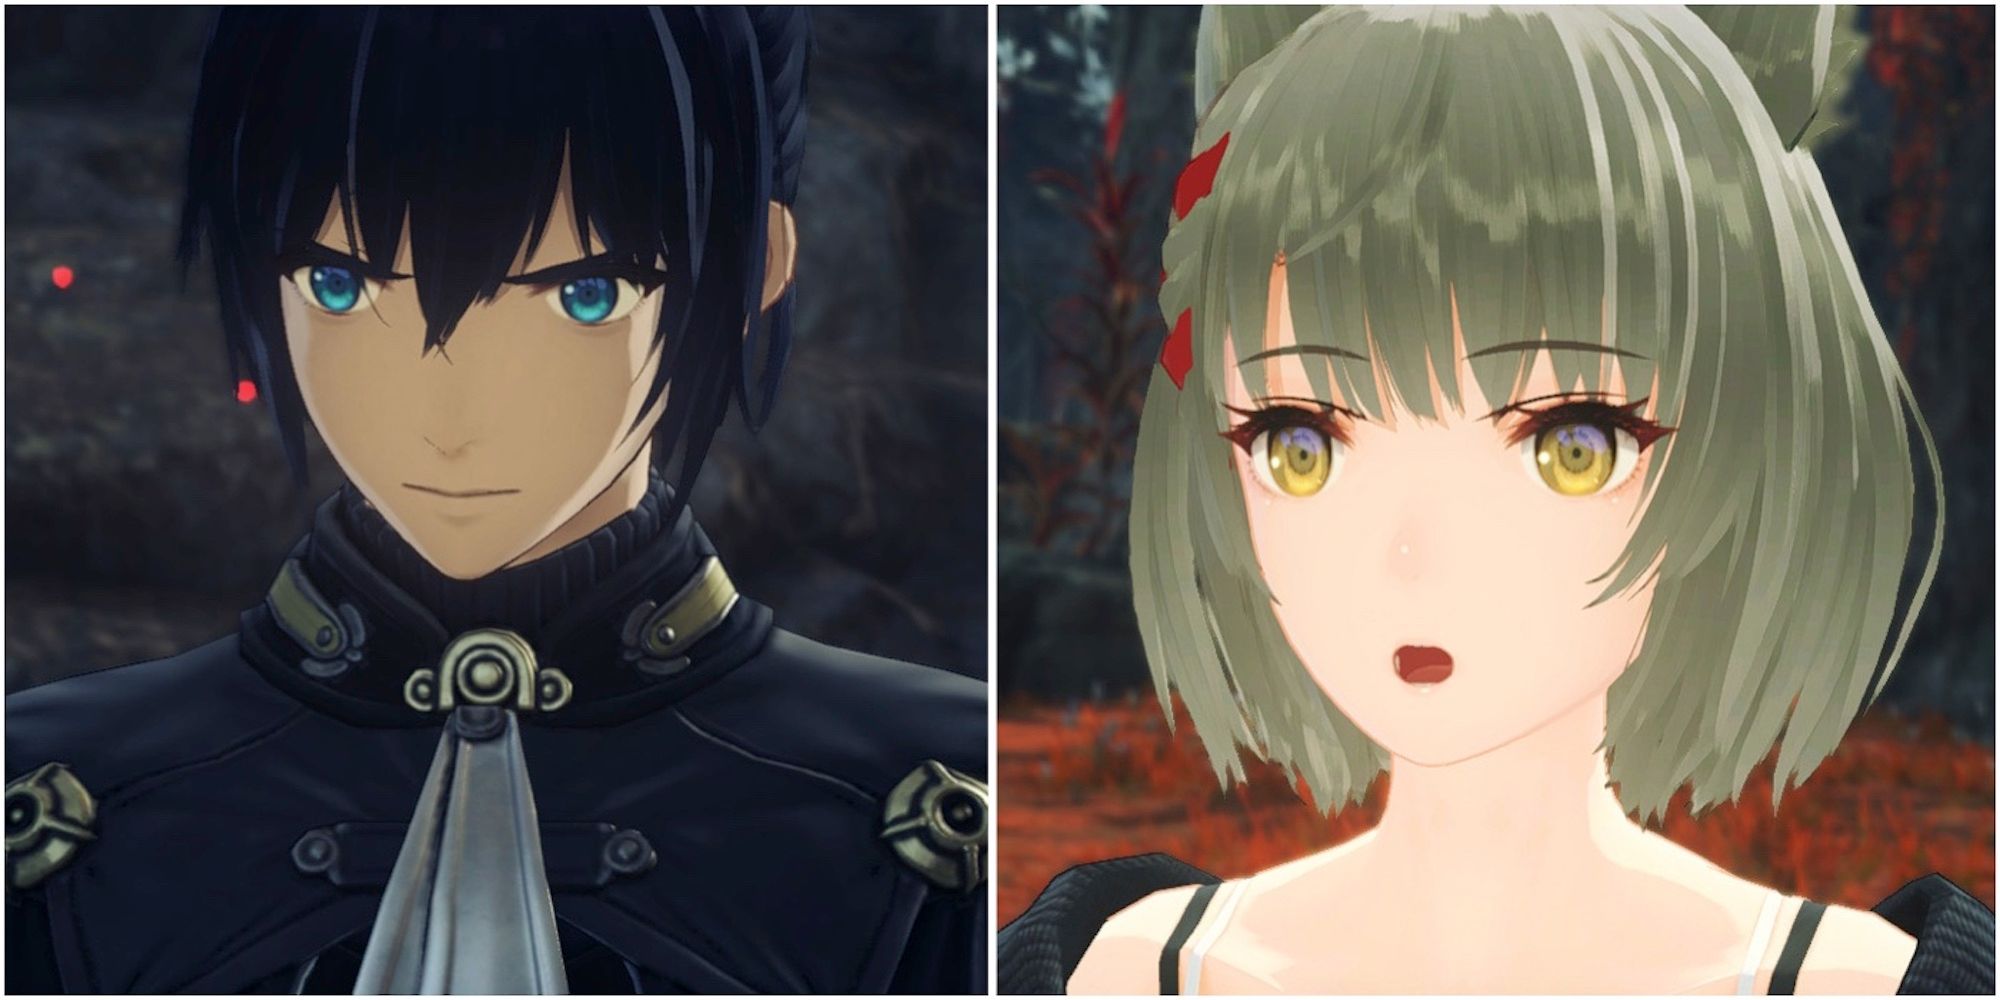 Noah and Mio in Xenoblade Chronicles 3